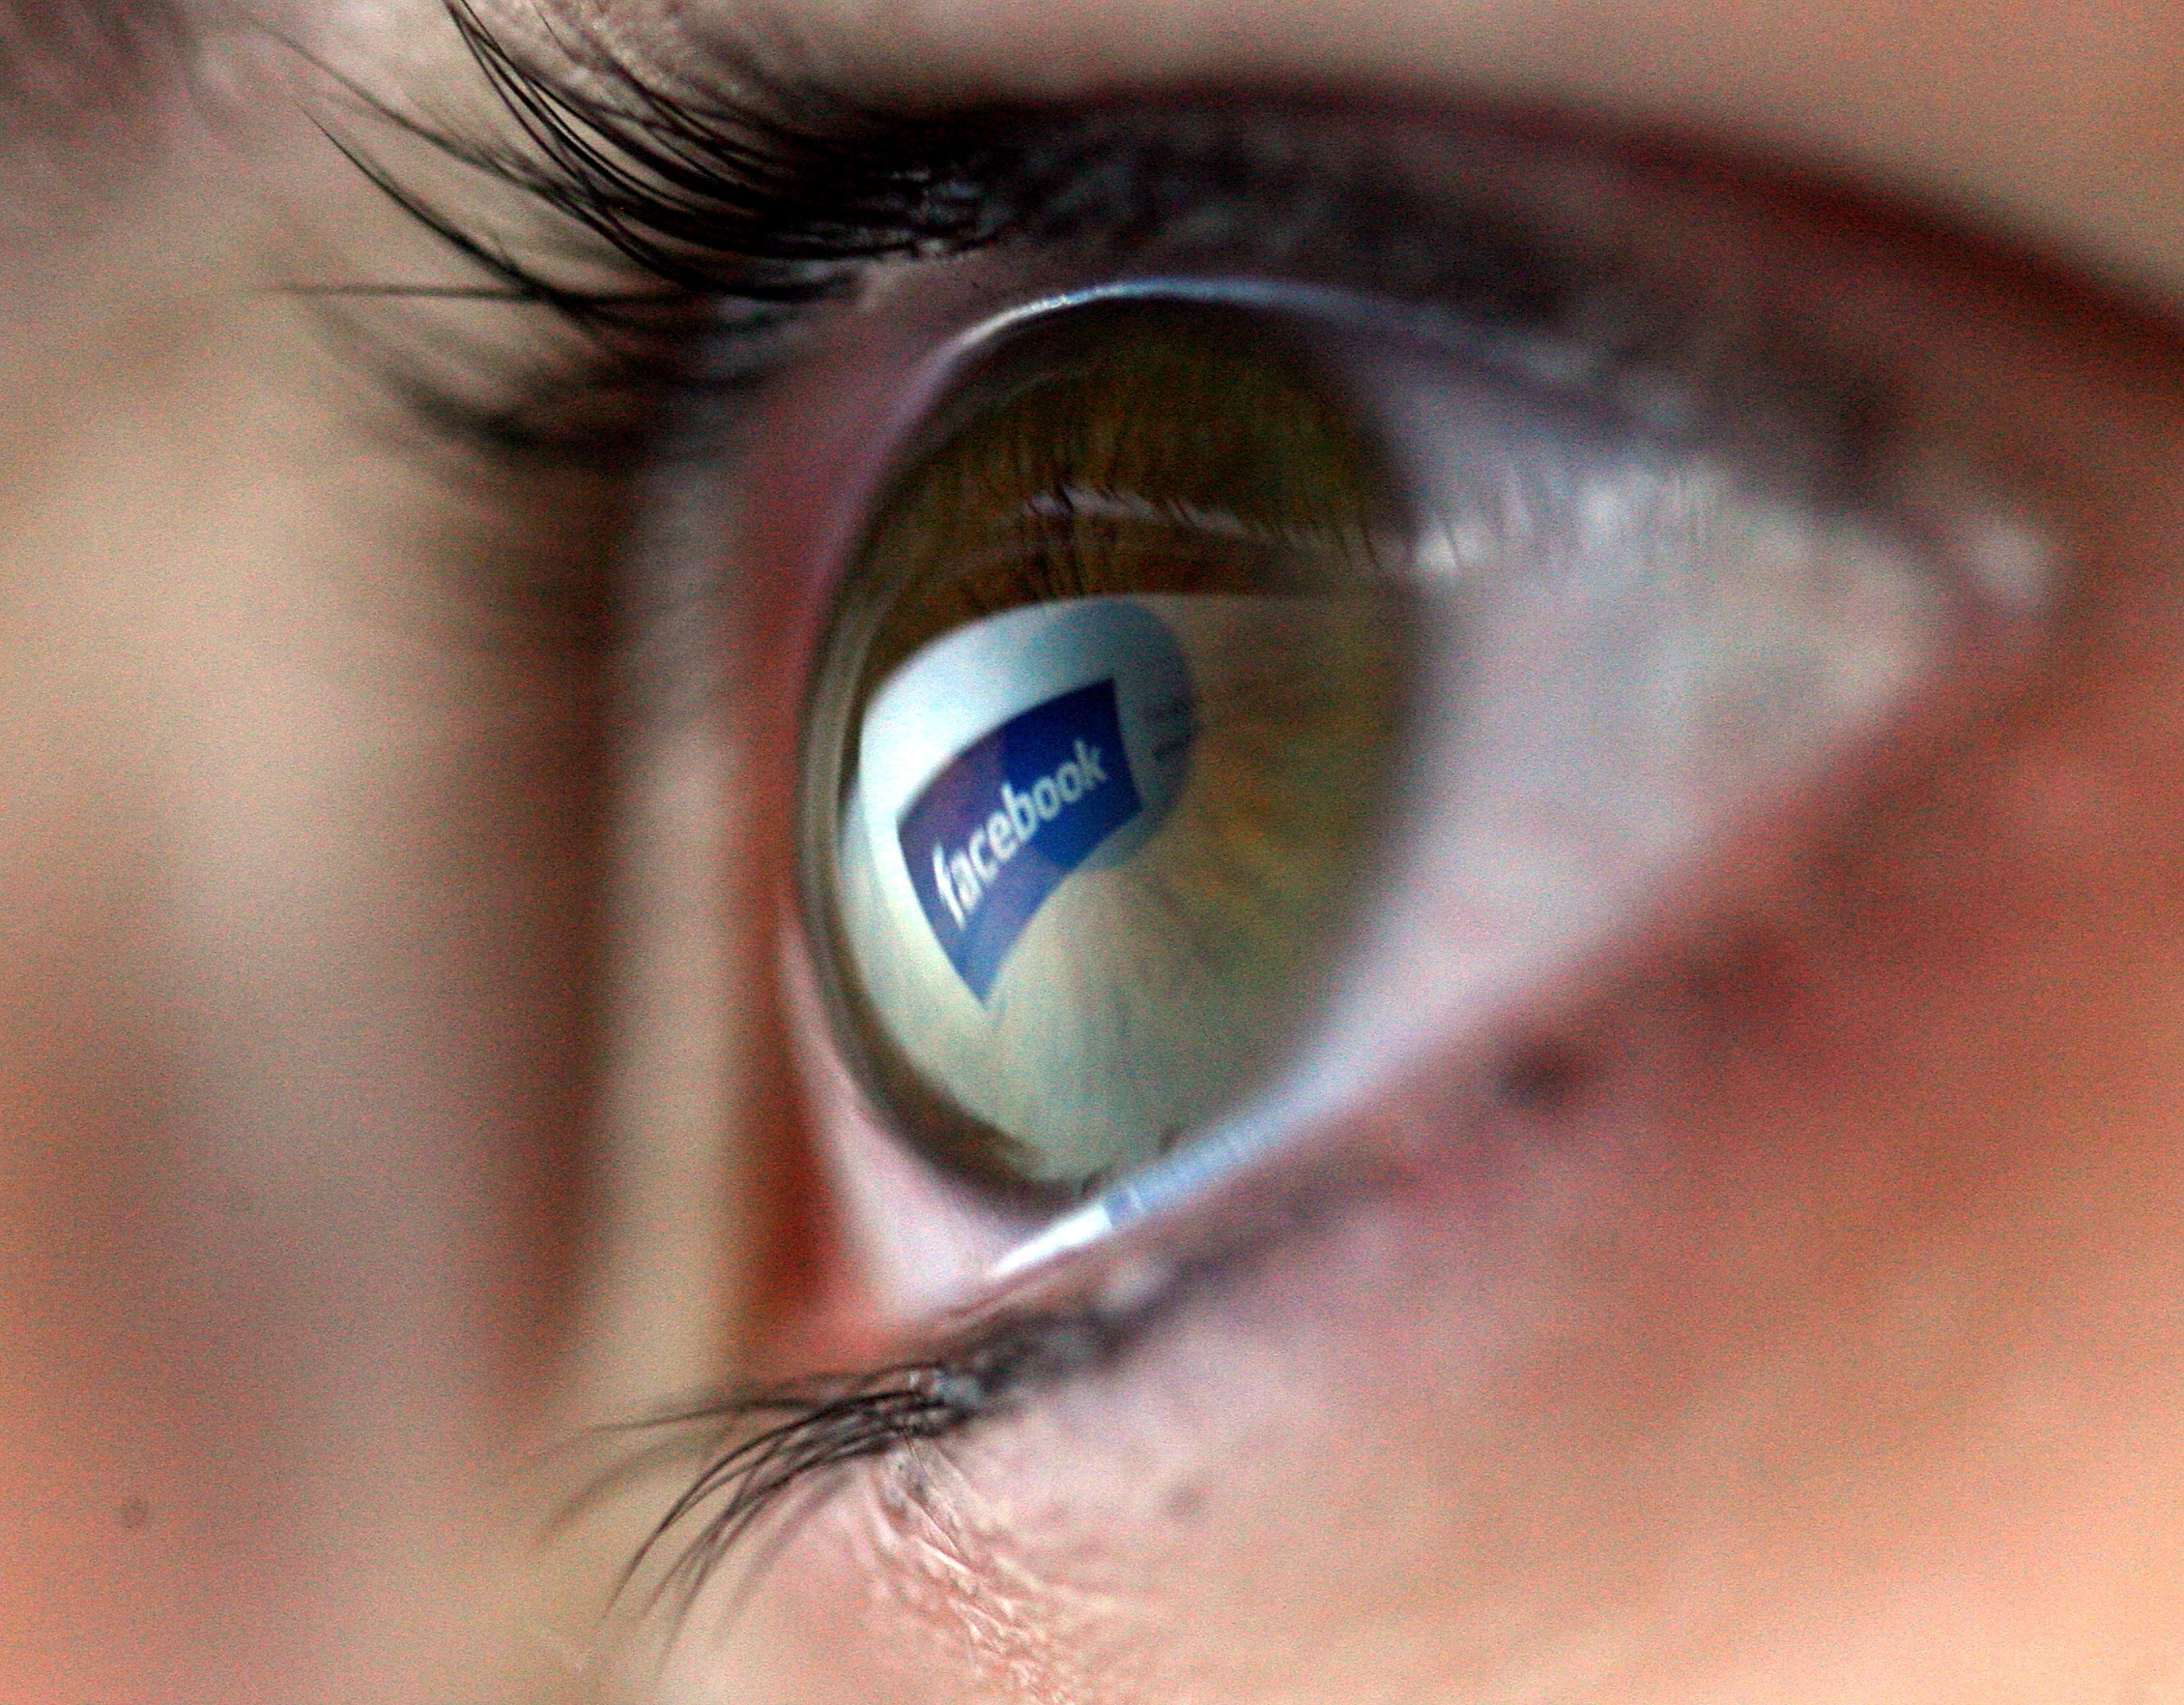 How to Delete Your Facebook Account in 5 Easy Steps